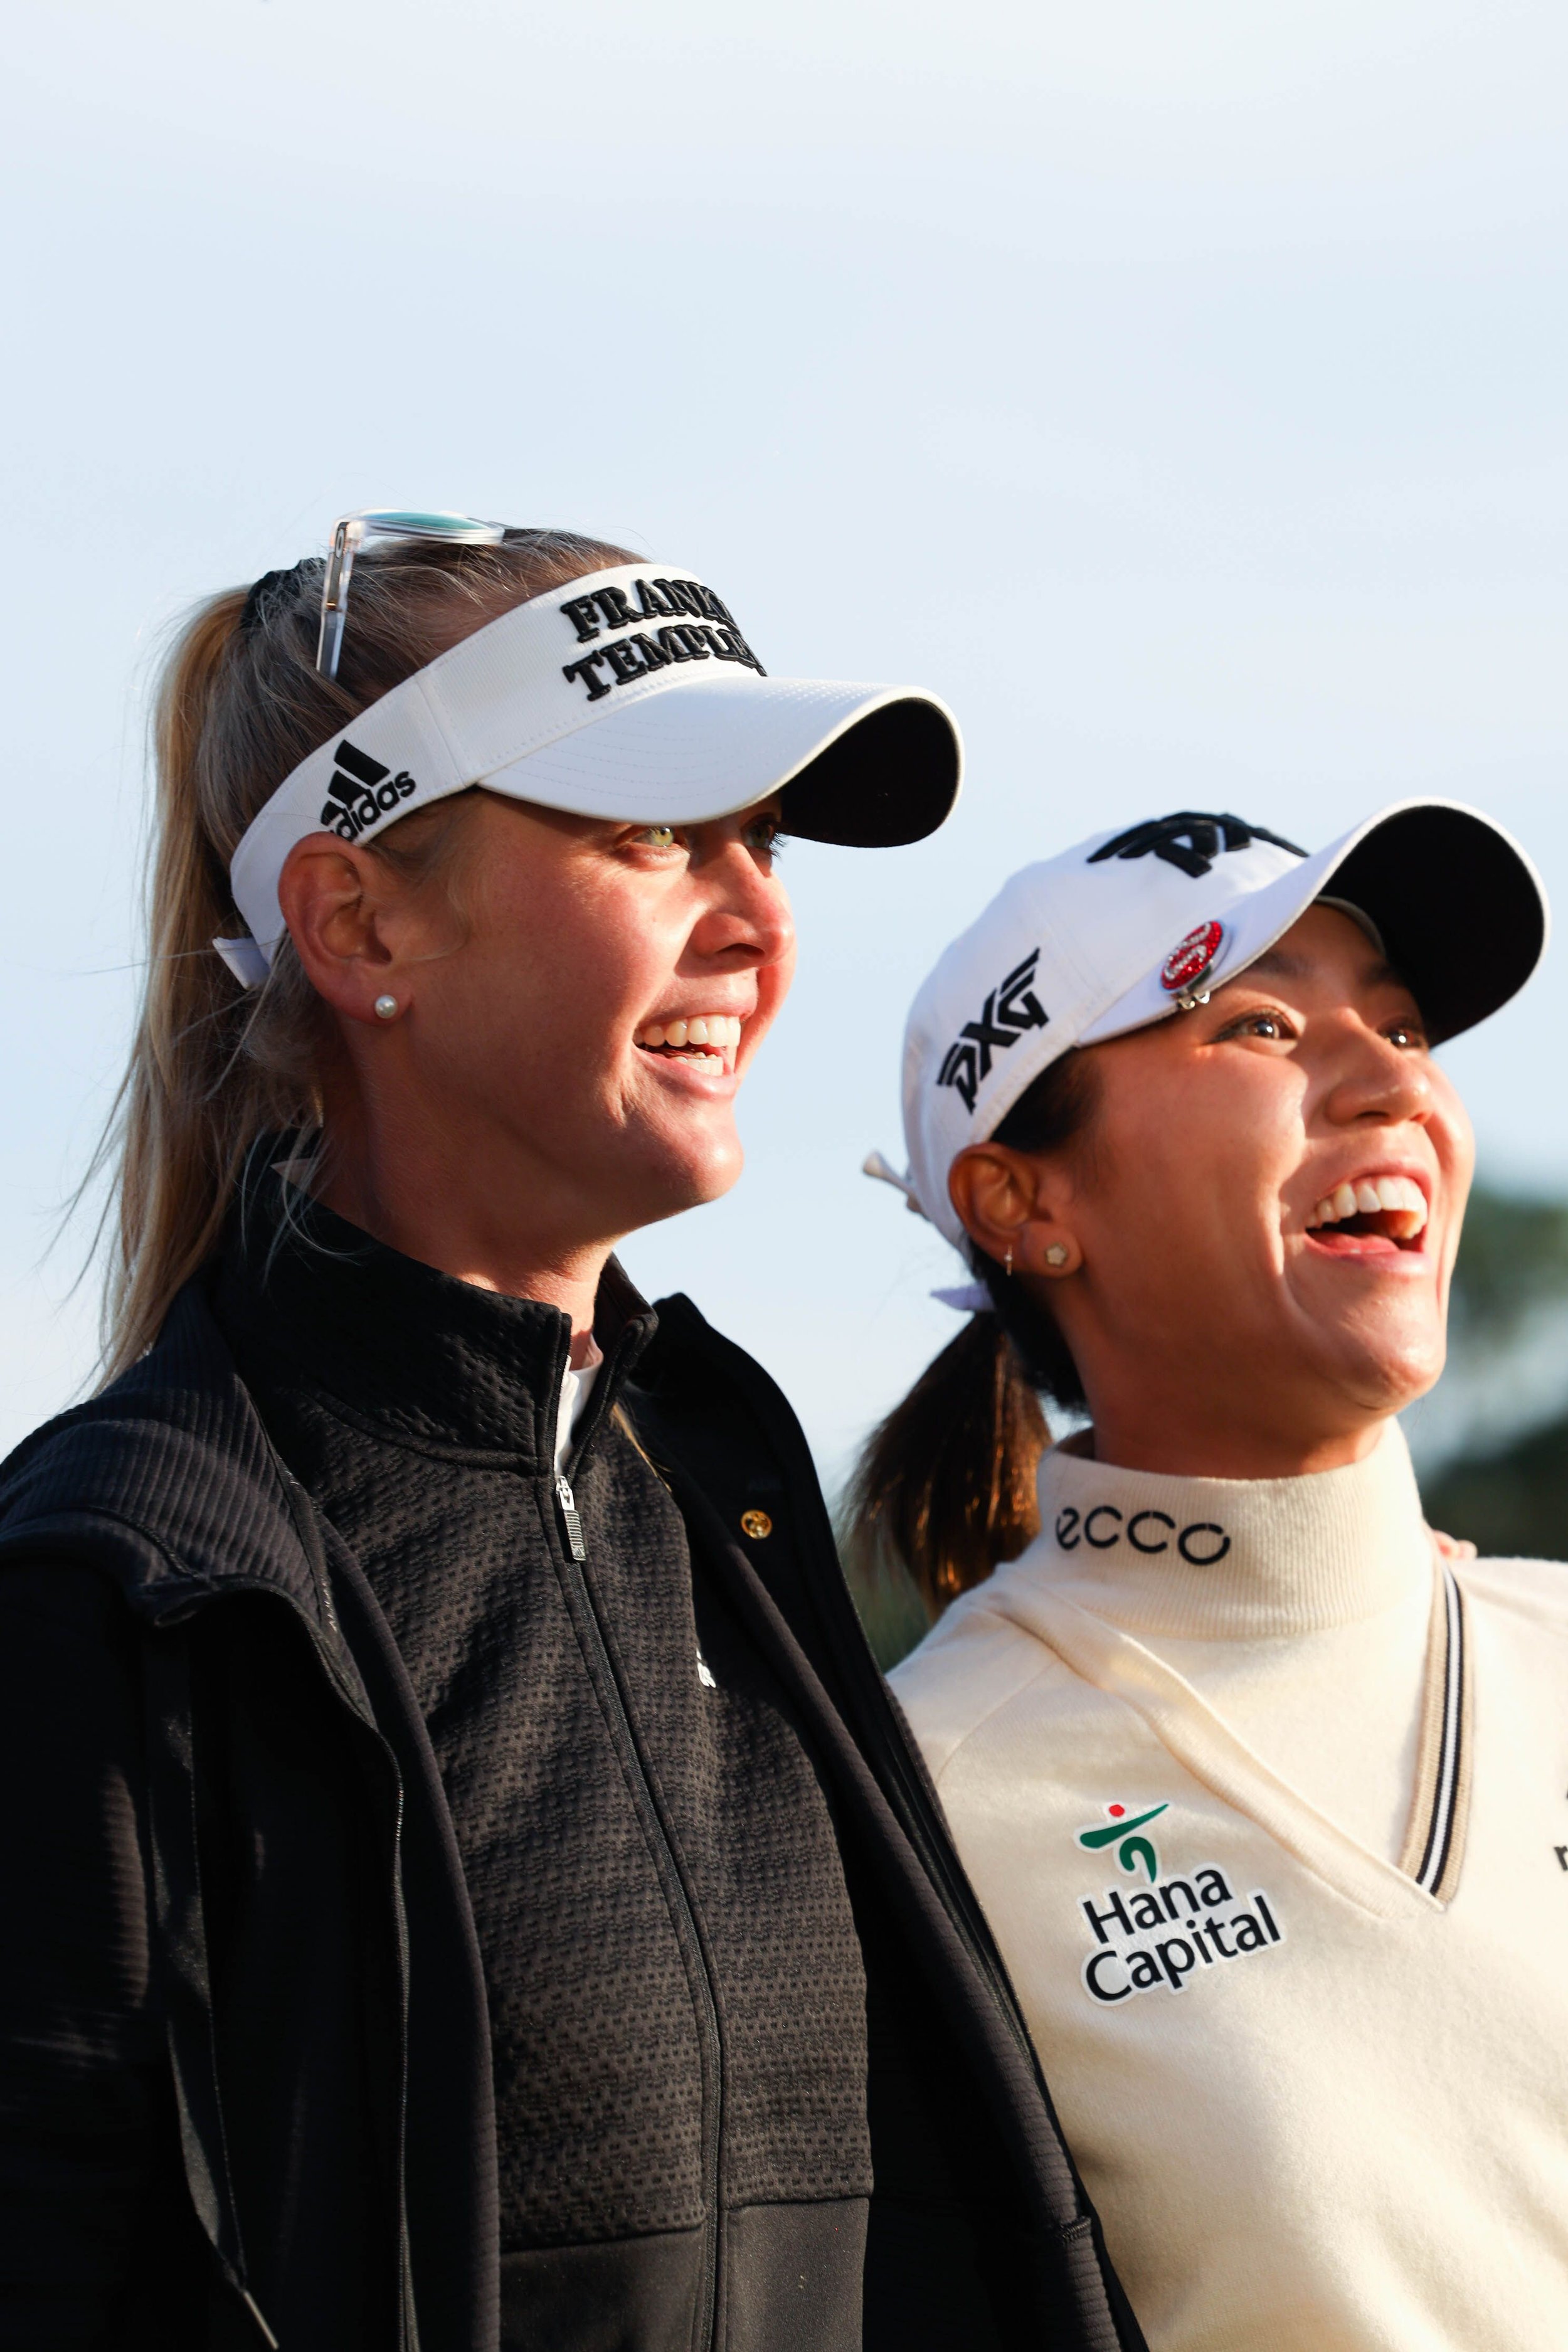  Female golf athletes smiling while reacting to tournament branded event photography. 